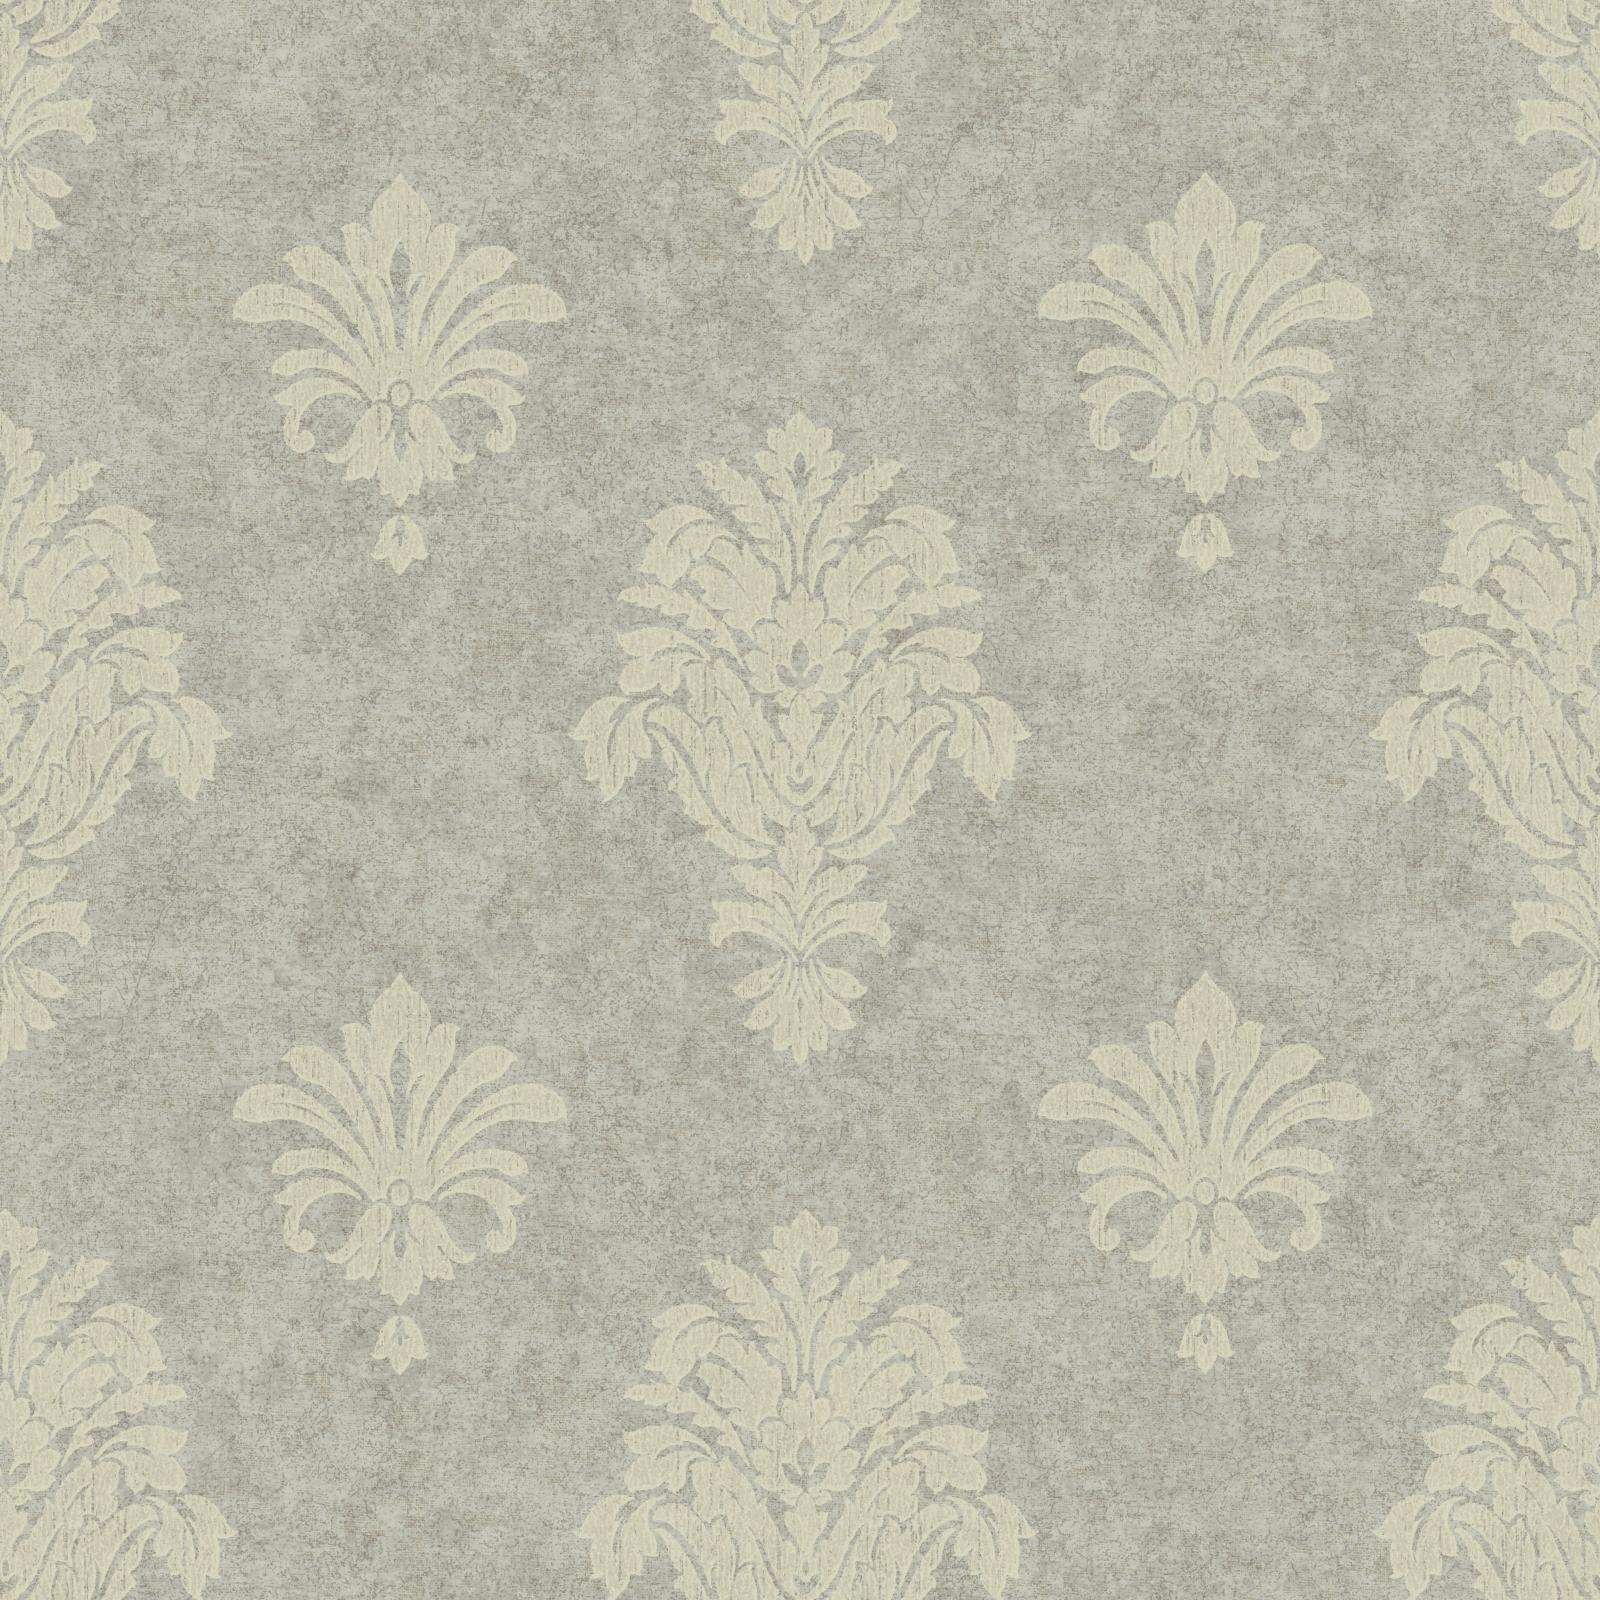 York Wallcoverings Impressions Distressed Spot Wallpaper